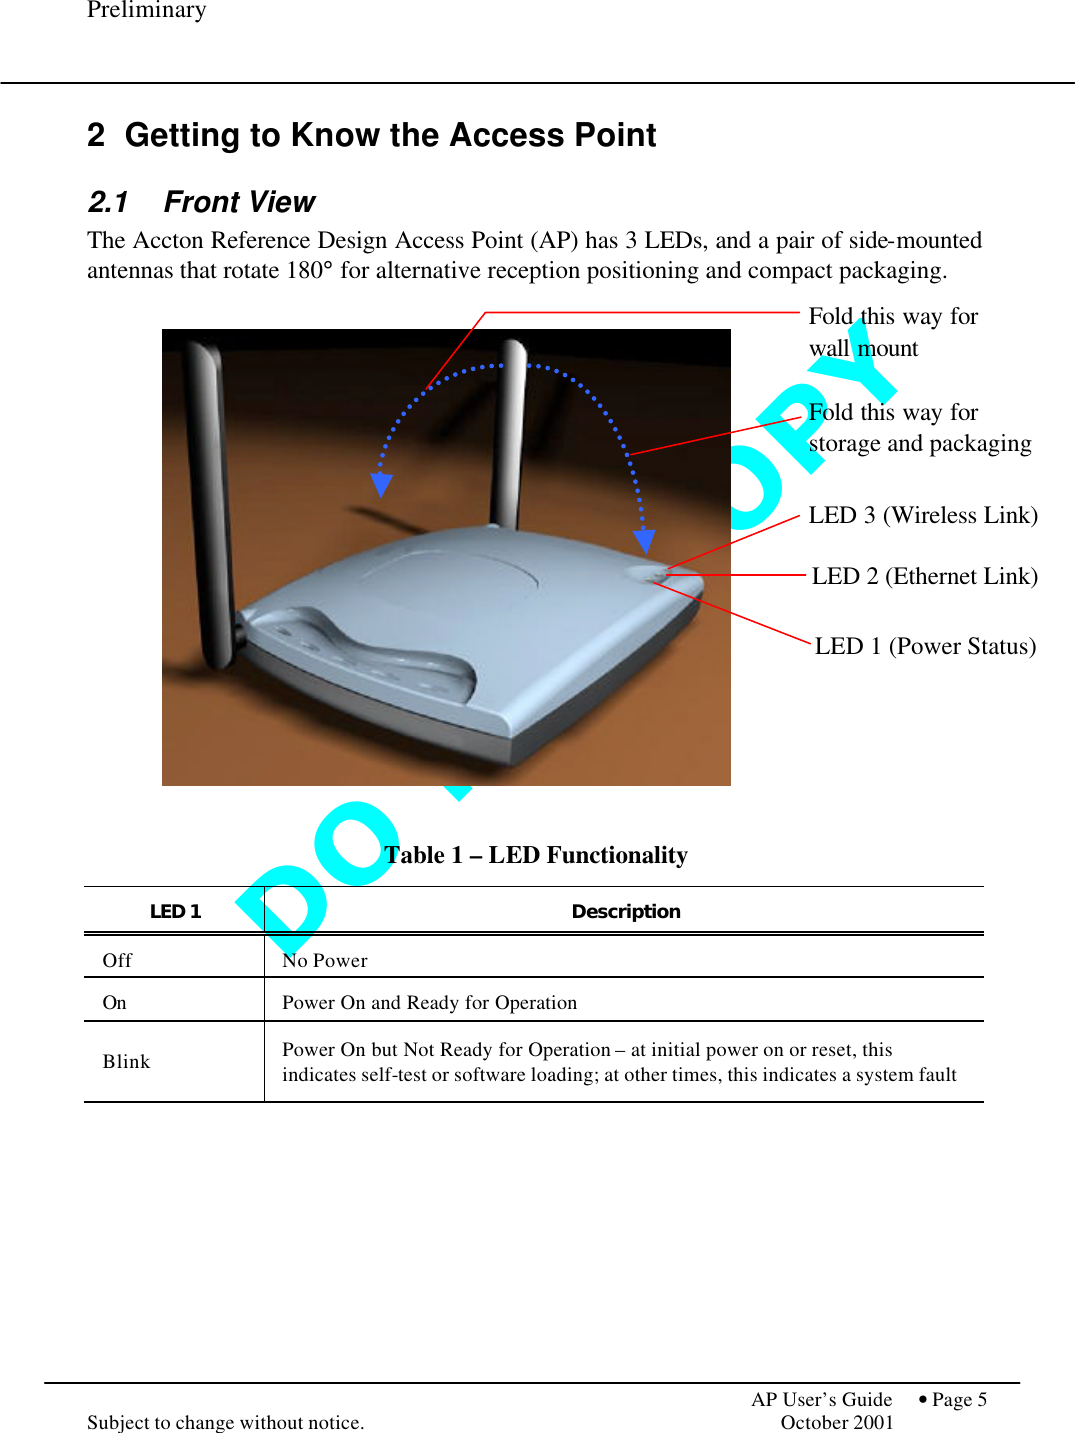 D O   N O T   C O P Y  Preliminary            AP User’s Guide  • Page 5 Subject to change without notice.    October 2001 2 Getting to Know the Access Point 2.1 Front View The Accton Reference Design Access Point (AP) has 3 LEDs, and a pair of side-mounted antennas that rotate 180° for alternative reception positioning and compact packaging.        Table 1 – LED Functionality  LED 1 Description Off No Power On Power On and Ready for Operation Blink Power On but Not Ready for Operation – at initial power on or reset, this indicates self-test or software loading; at other times, this indicates a system fault  LED 1 (Power Status) LED 2 (Ethernet Link) LED 3 (Wireless Link) Fold this way for storage and packaging Fold this way for wall mount 